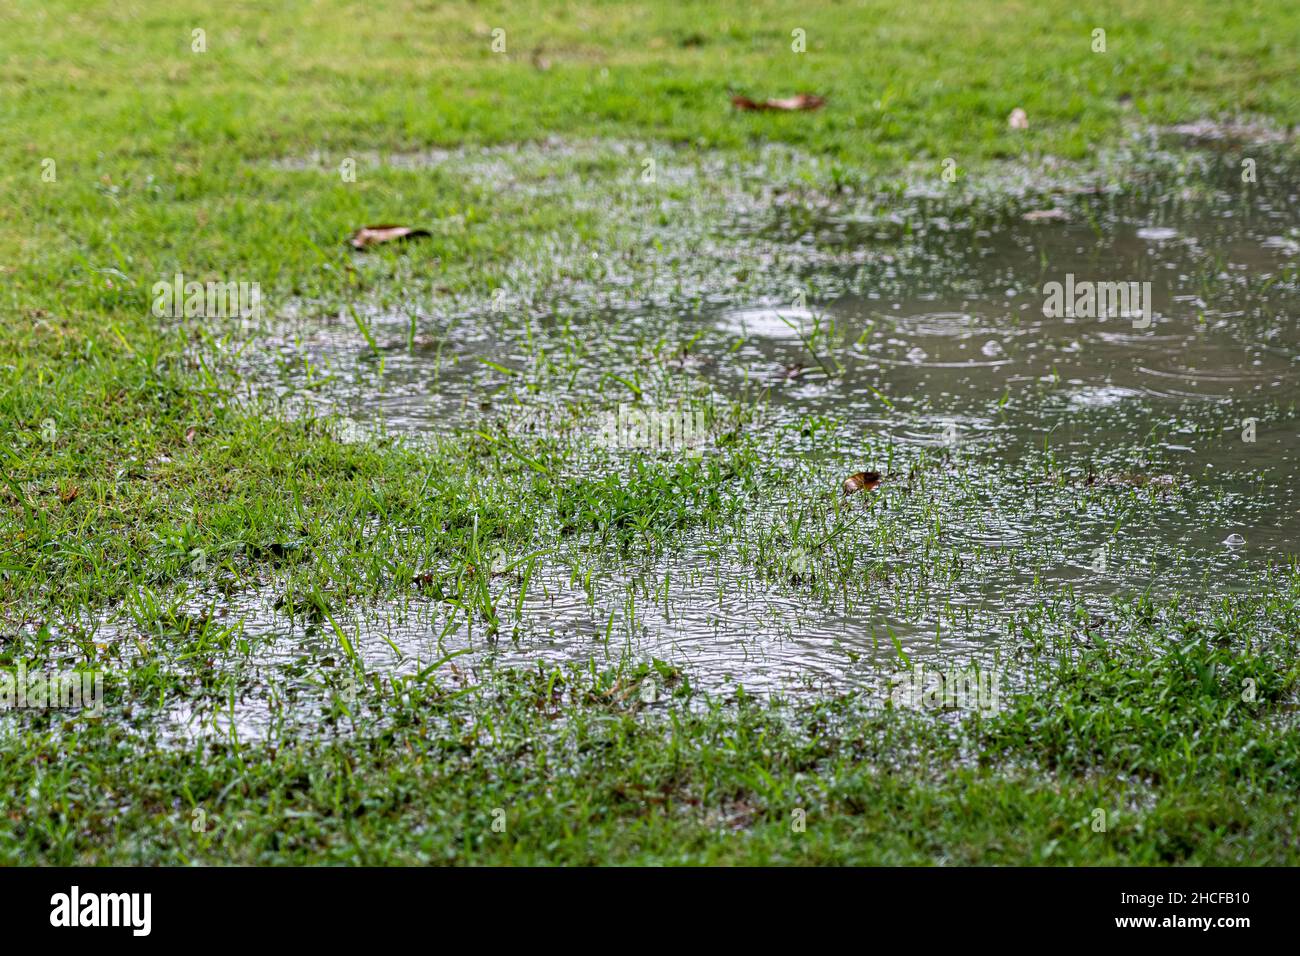 Pudle on the lawn caused by the rainstorm. Closeups to raindrops falling on water and dry leaves. Stock Photo